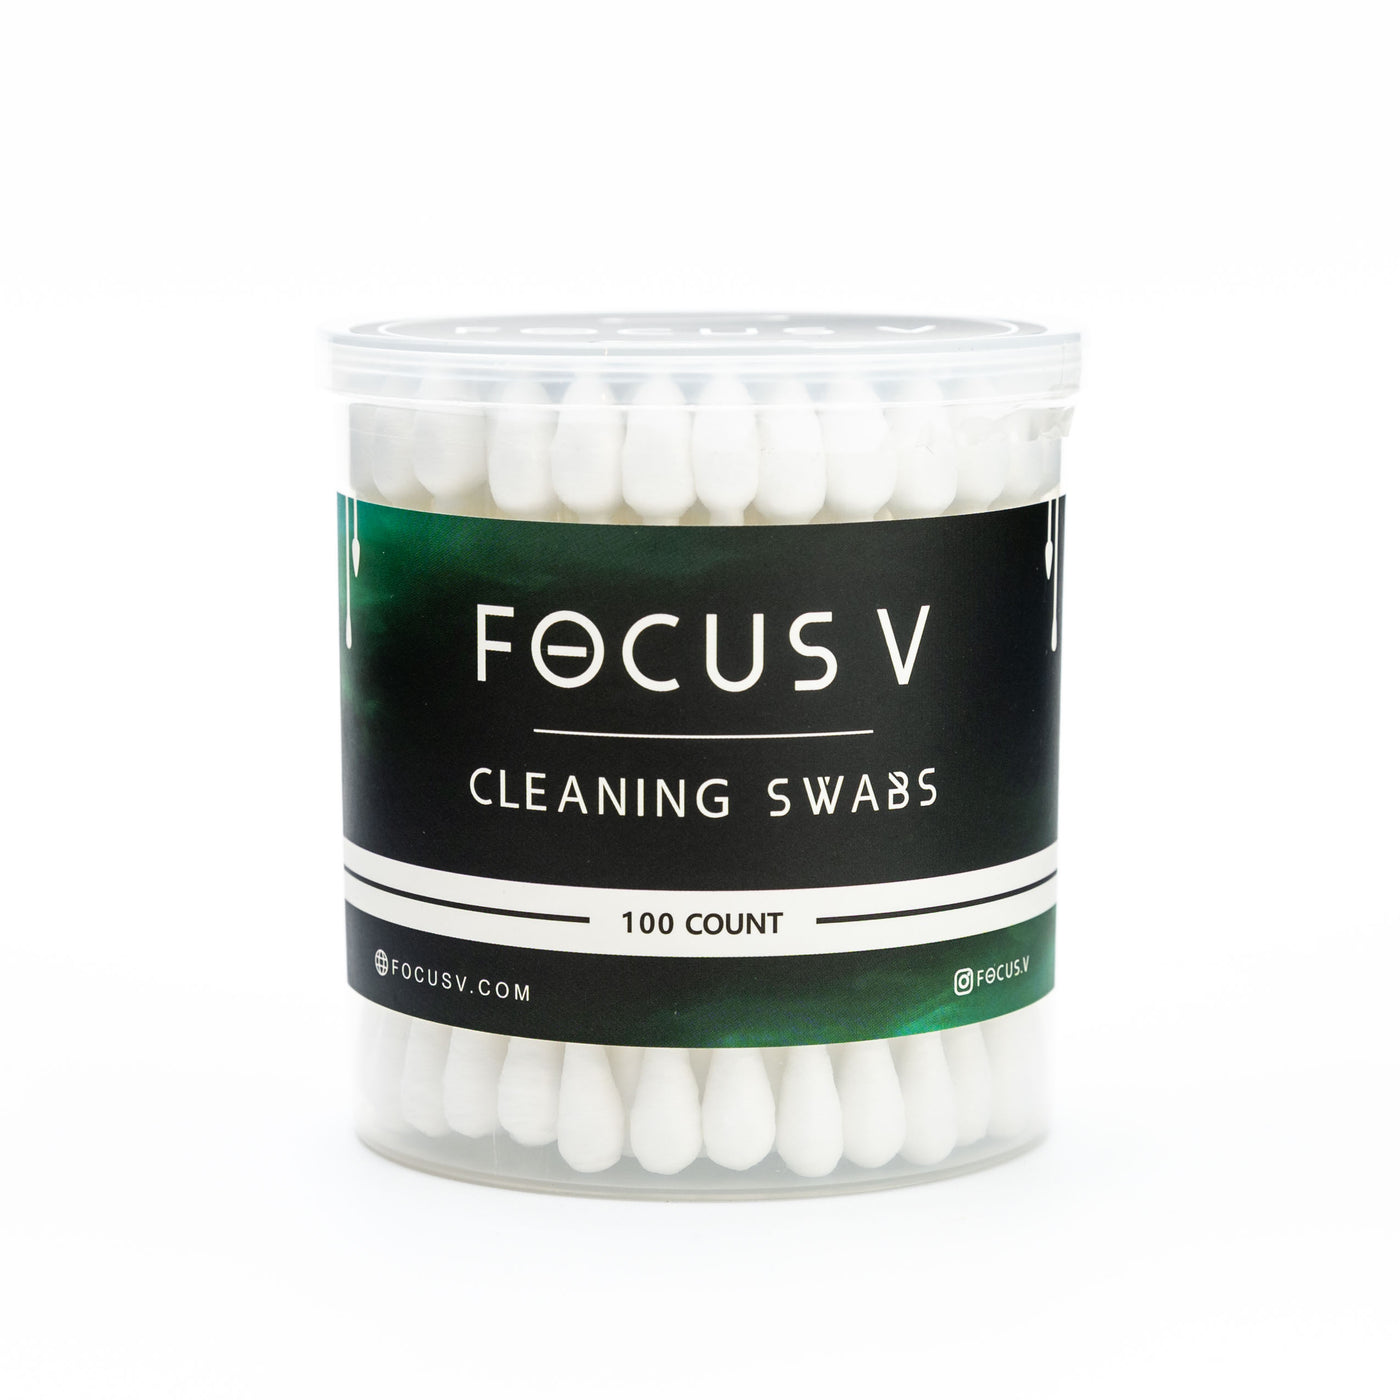 Focus V Dab Swabs keep your portable dab rigs clean